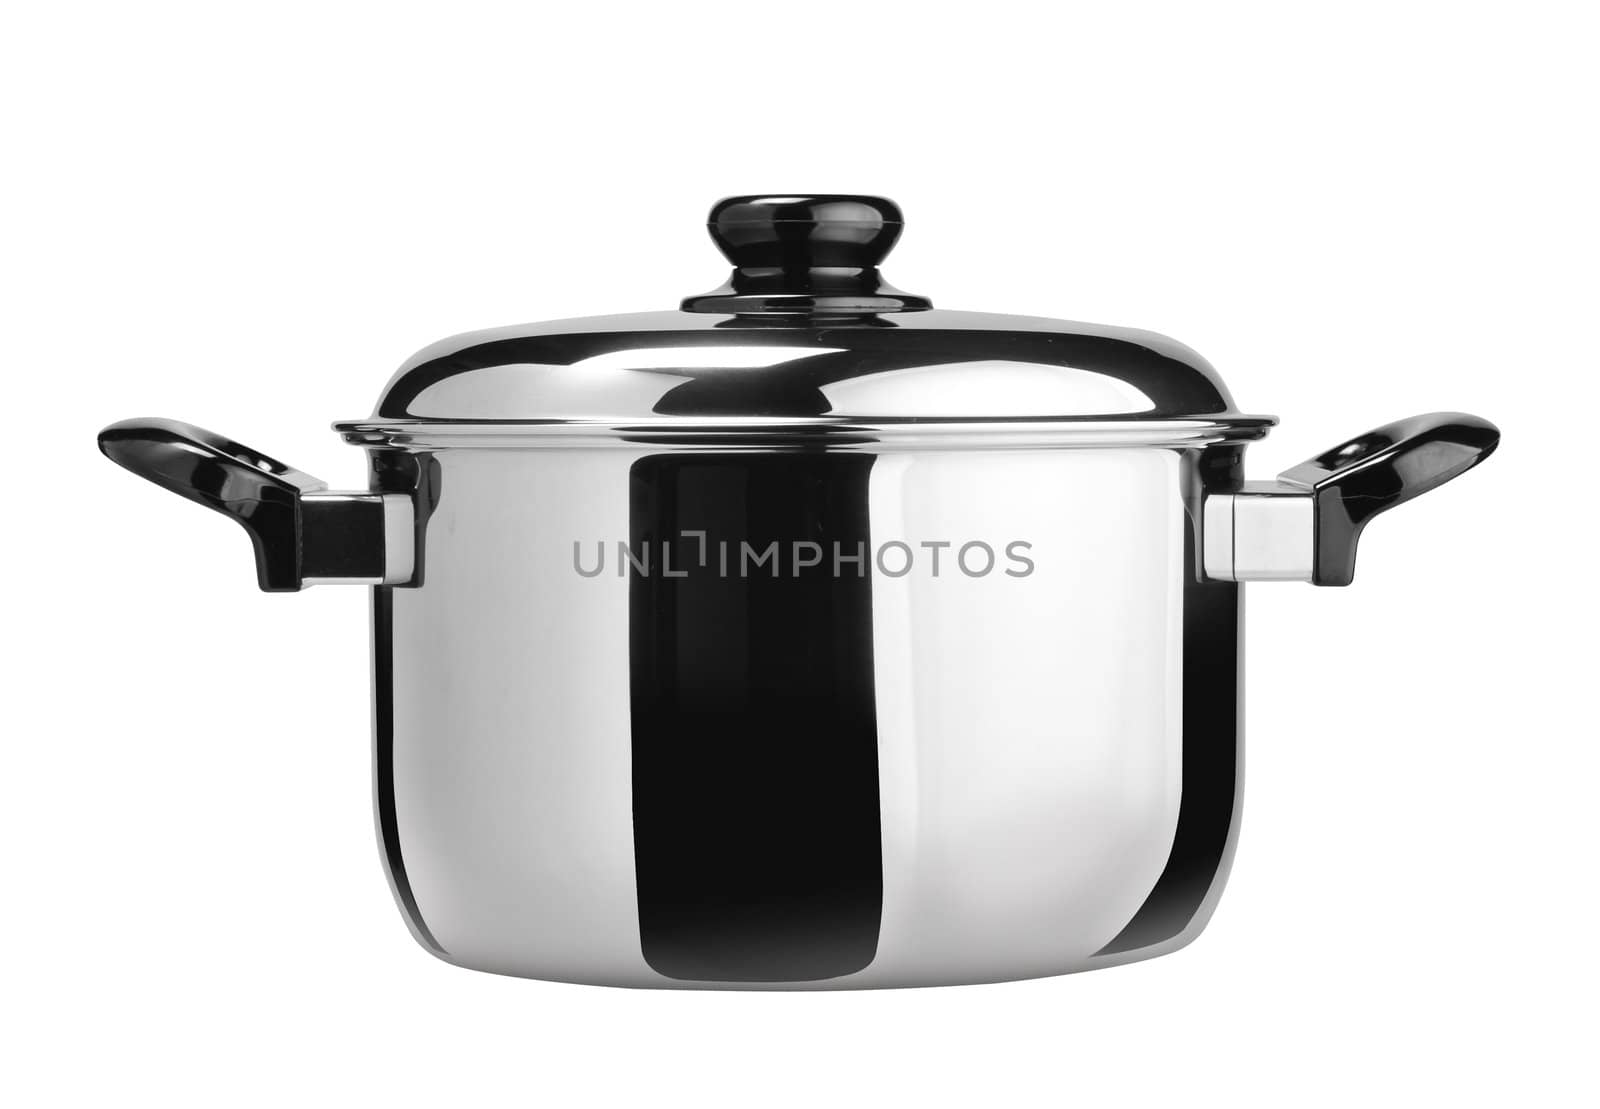 Stainless steel cooking pot isolated on white